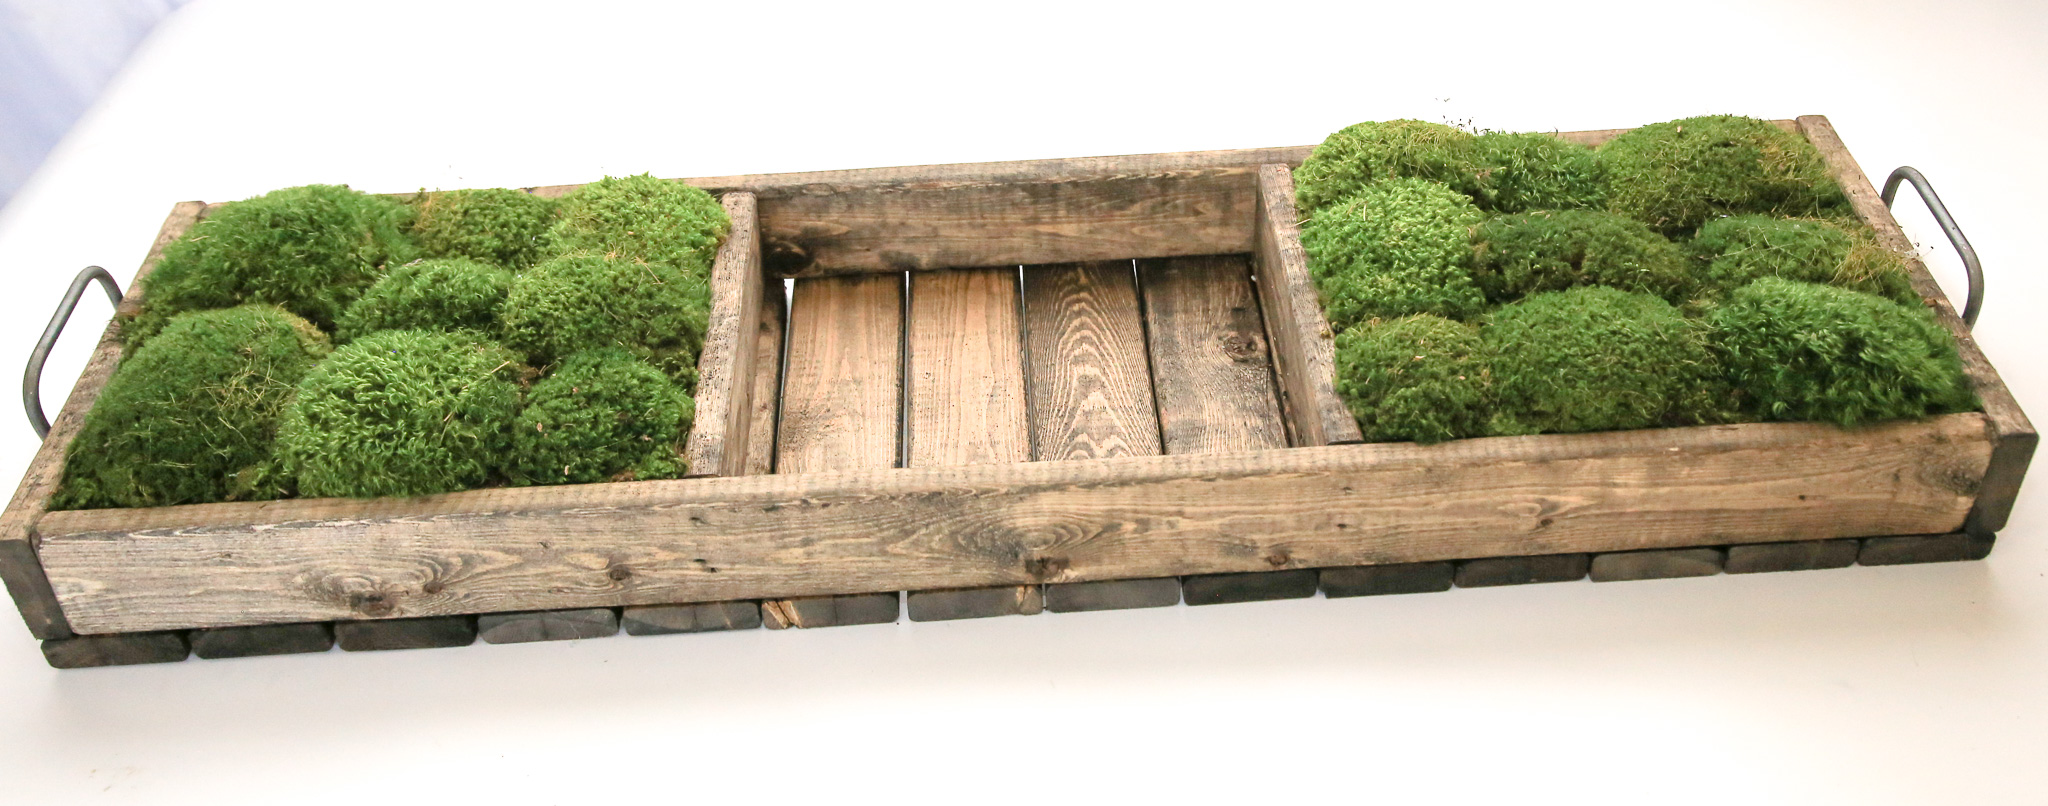 Two Compartment Mossed Wood Tray